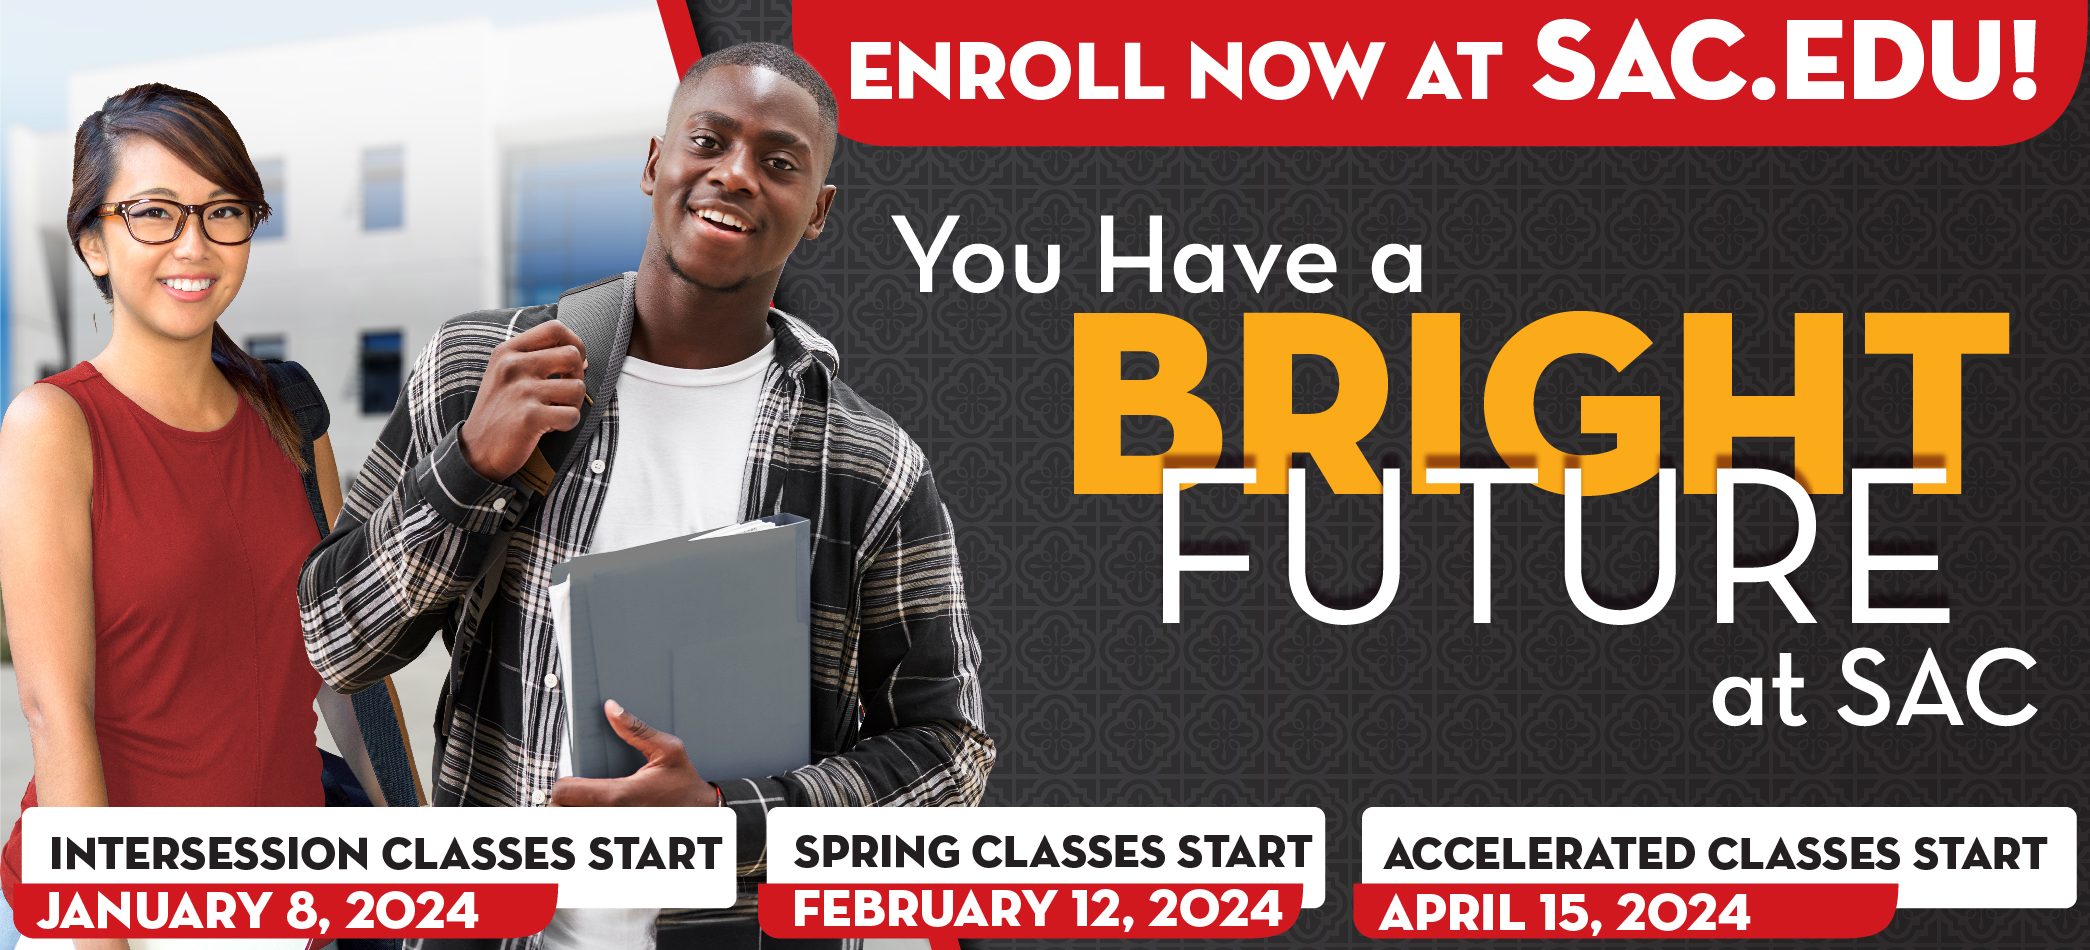 You have a bright future at SAC! Enroll now!